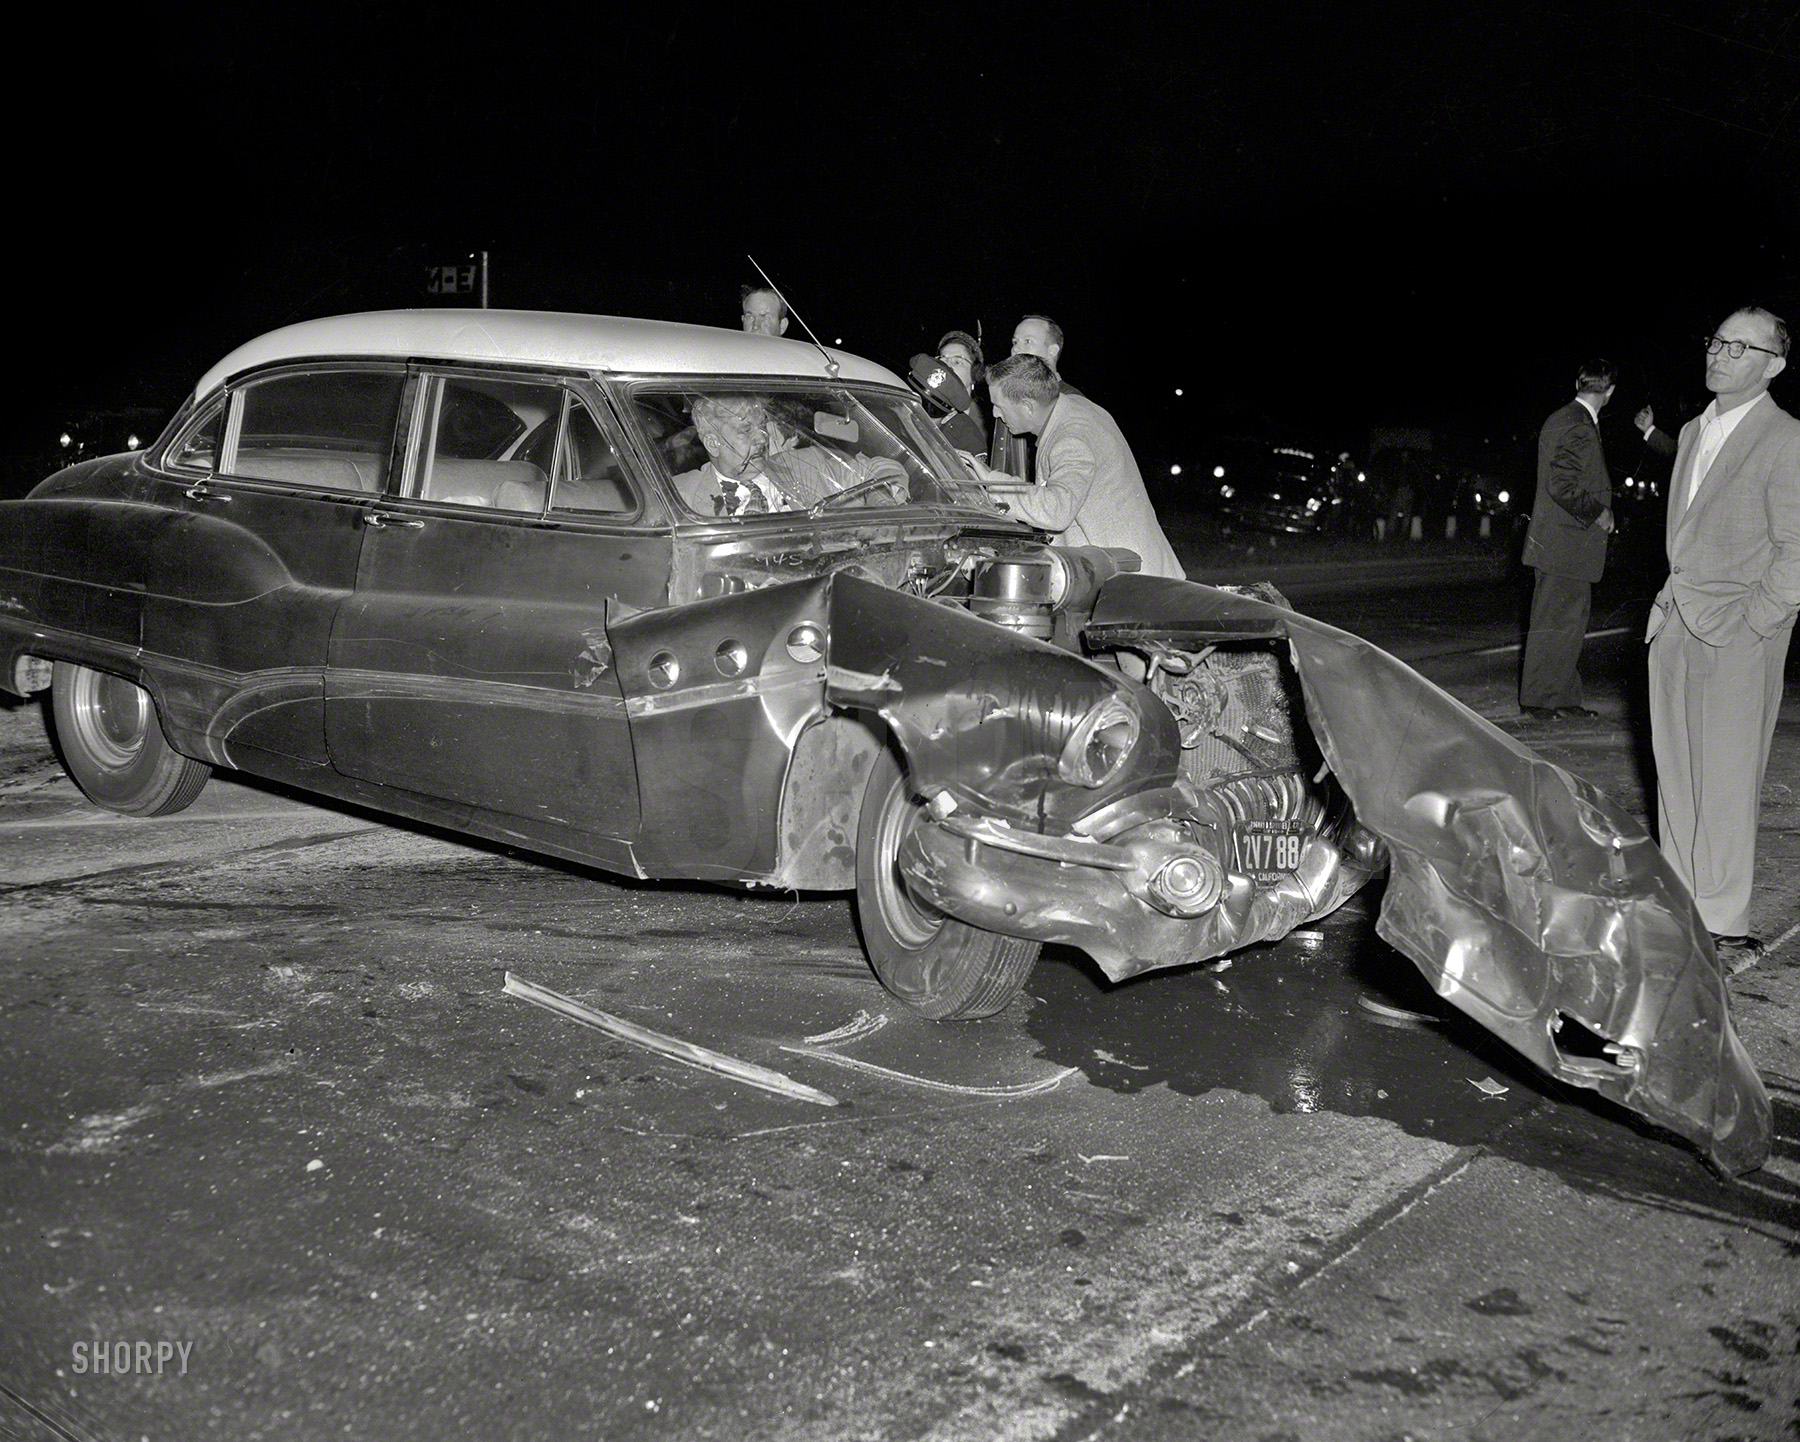 Oakland circa 1955, and yet another Buick come a cropper. We promise to call an ambulance just as soon as you finish filling out these photo releases! 4x5 inch acetate negative from the Shorpy News Photo Archive. View full size.